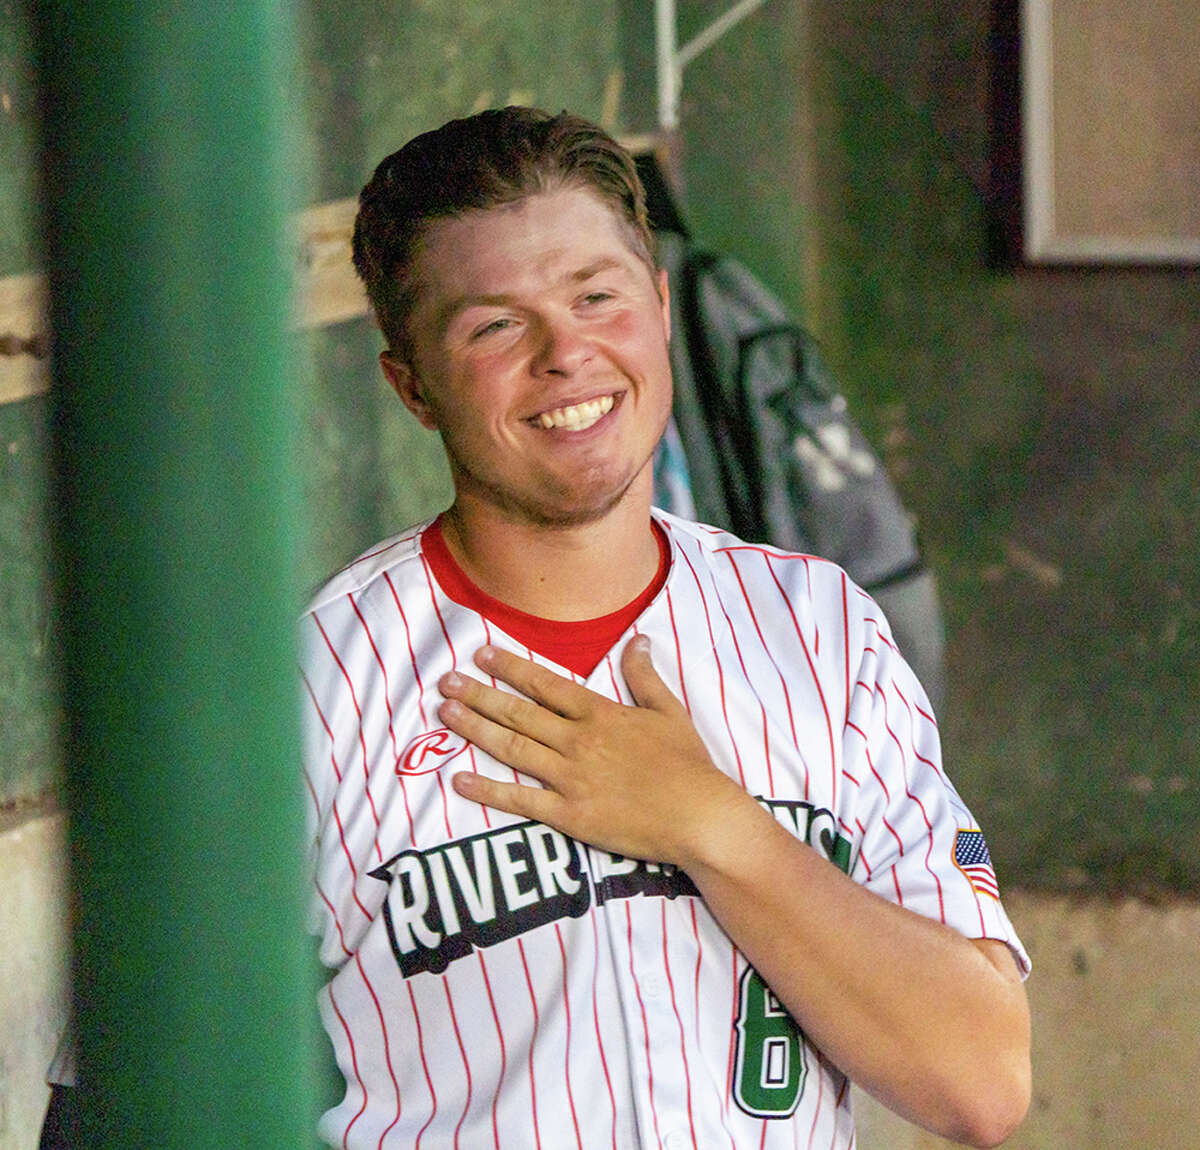 River Dragons pitcher Adam Stilts from Alton, shown in the dugout this summer, has said he will return to play with the team next summer after helping the Dragons get to the 2022 Prospect League Championship Series.